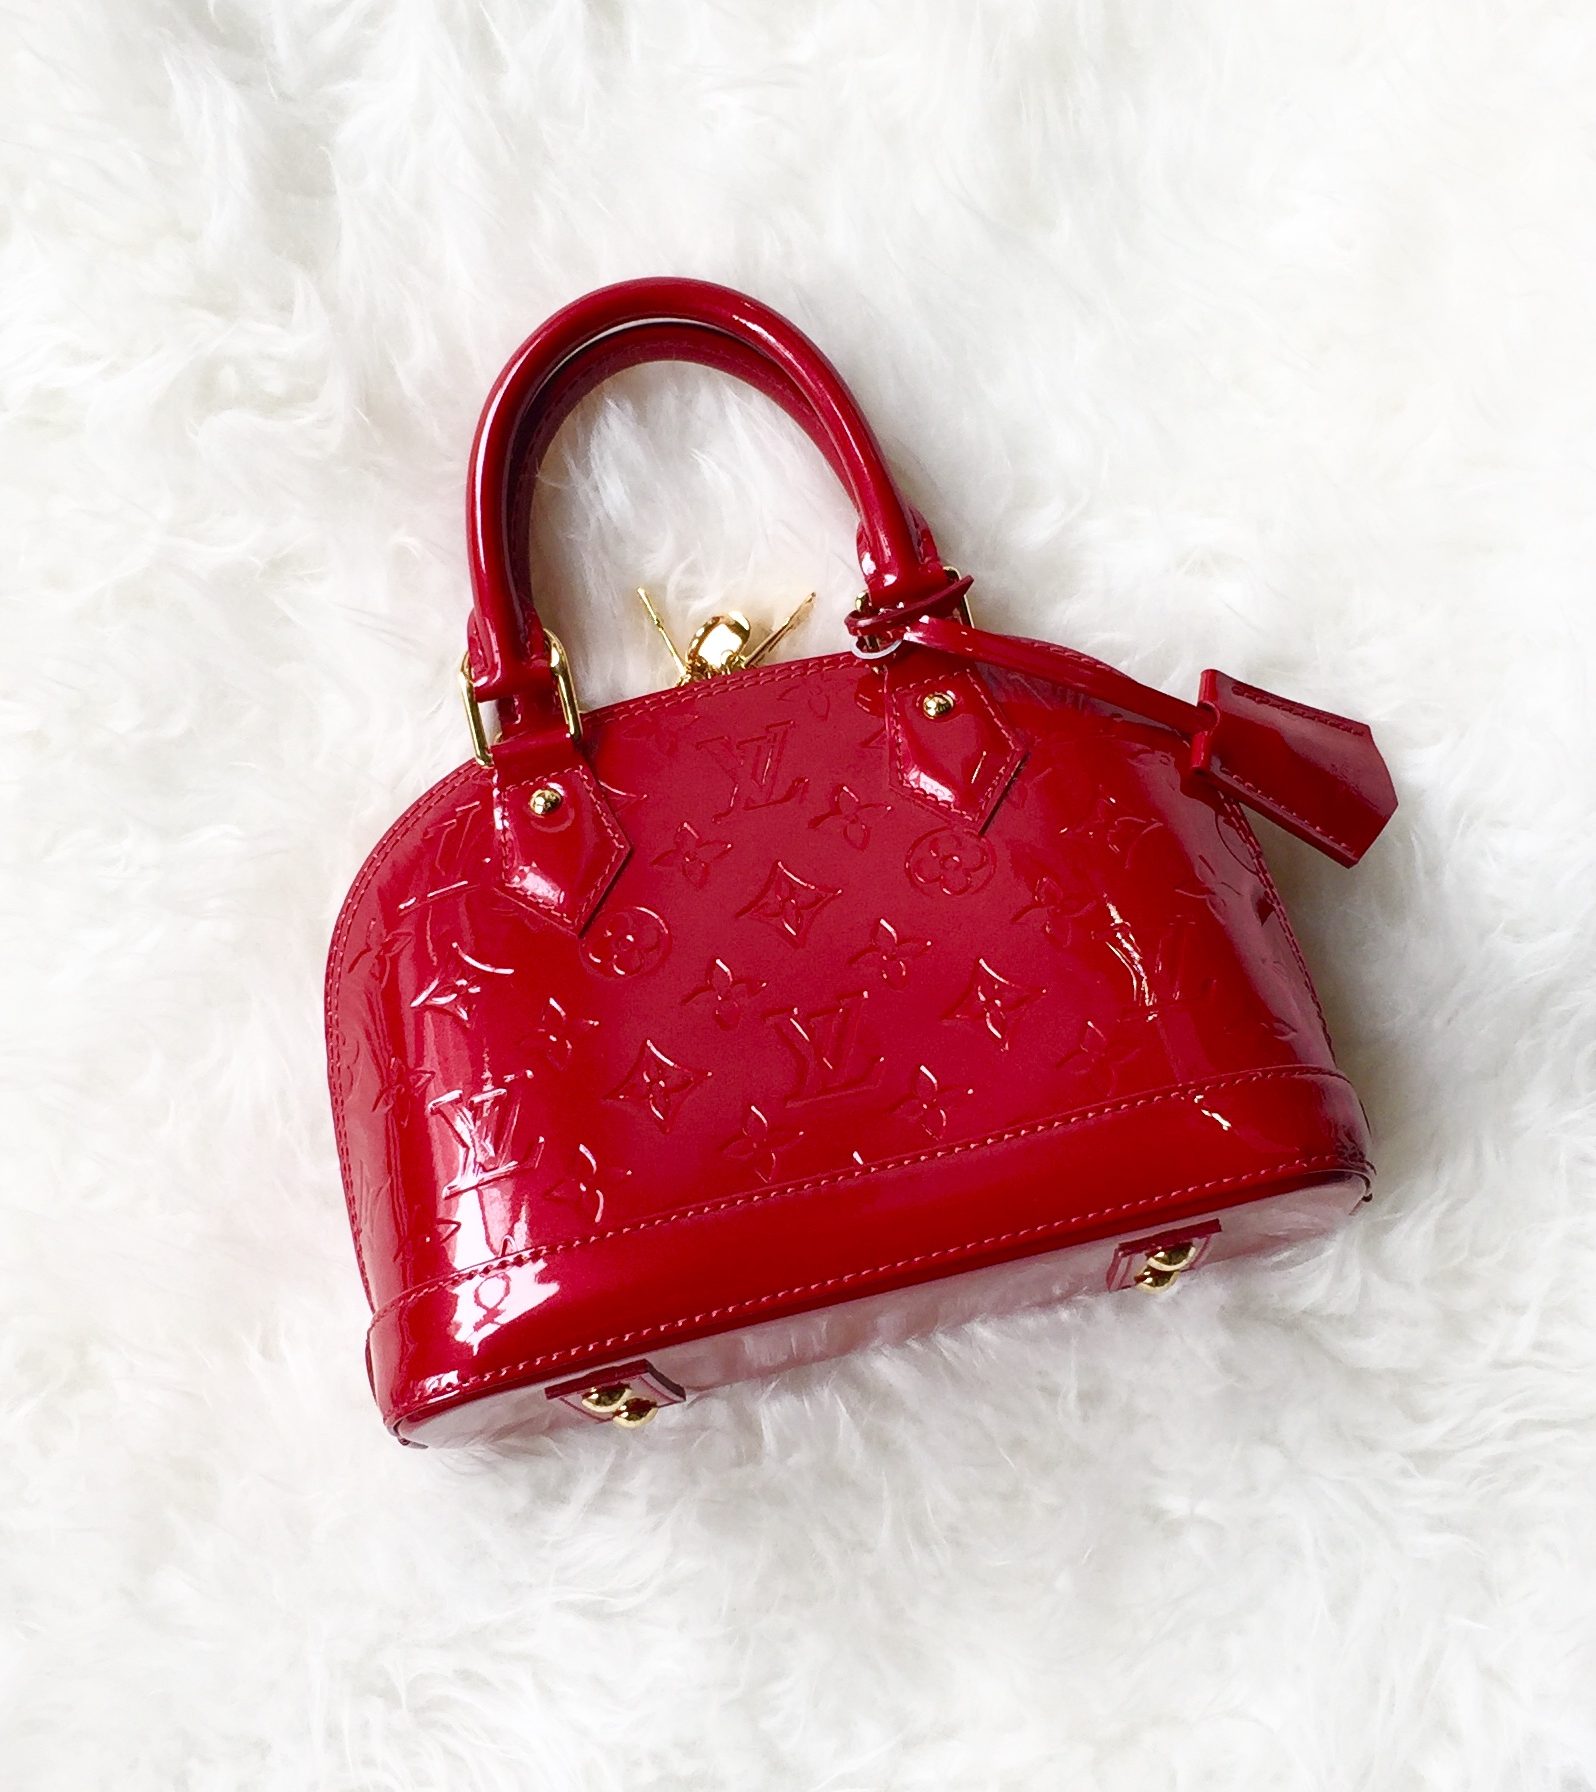 Did a Louis Vuitton bag inadvertently teach us why we don't